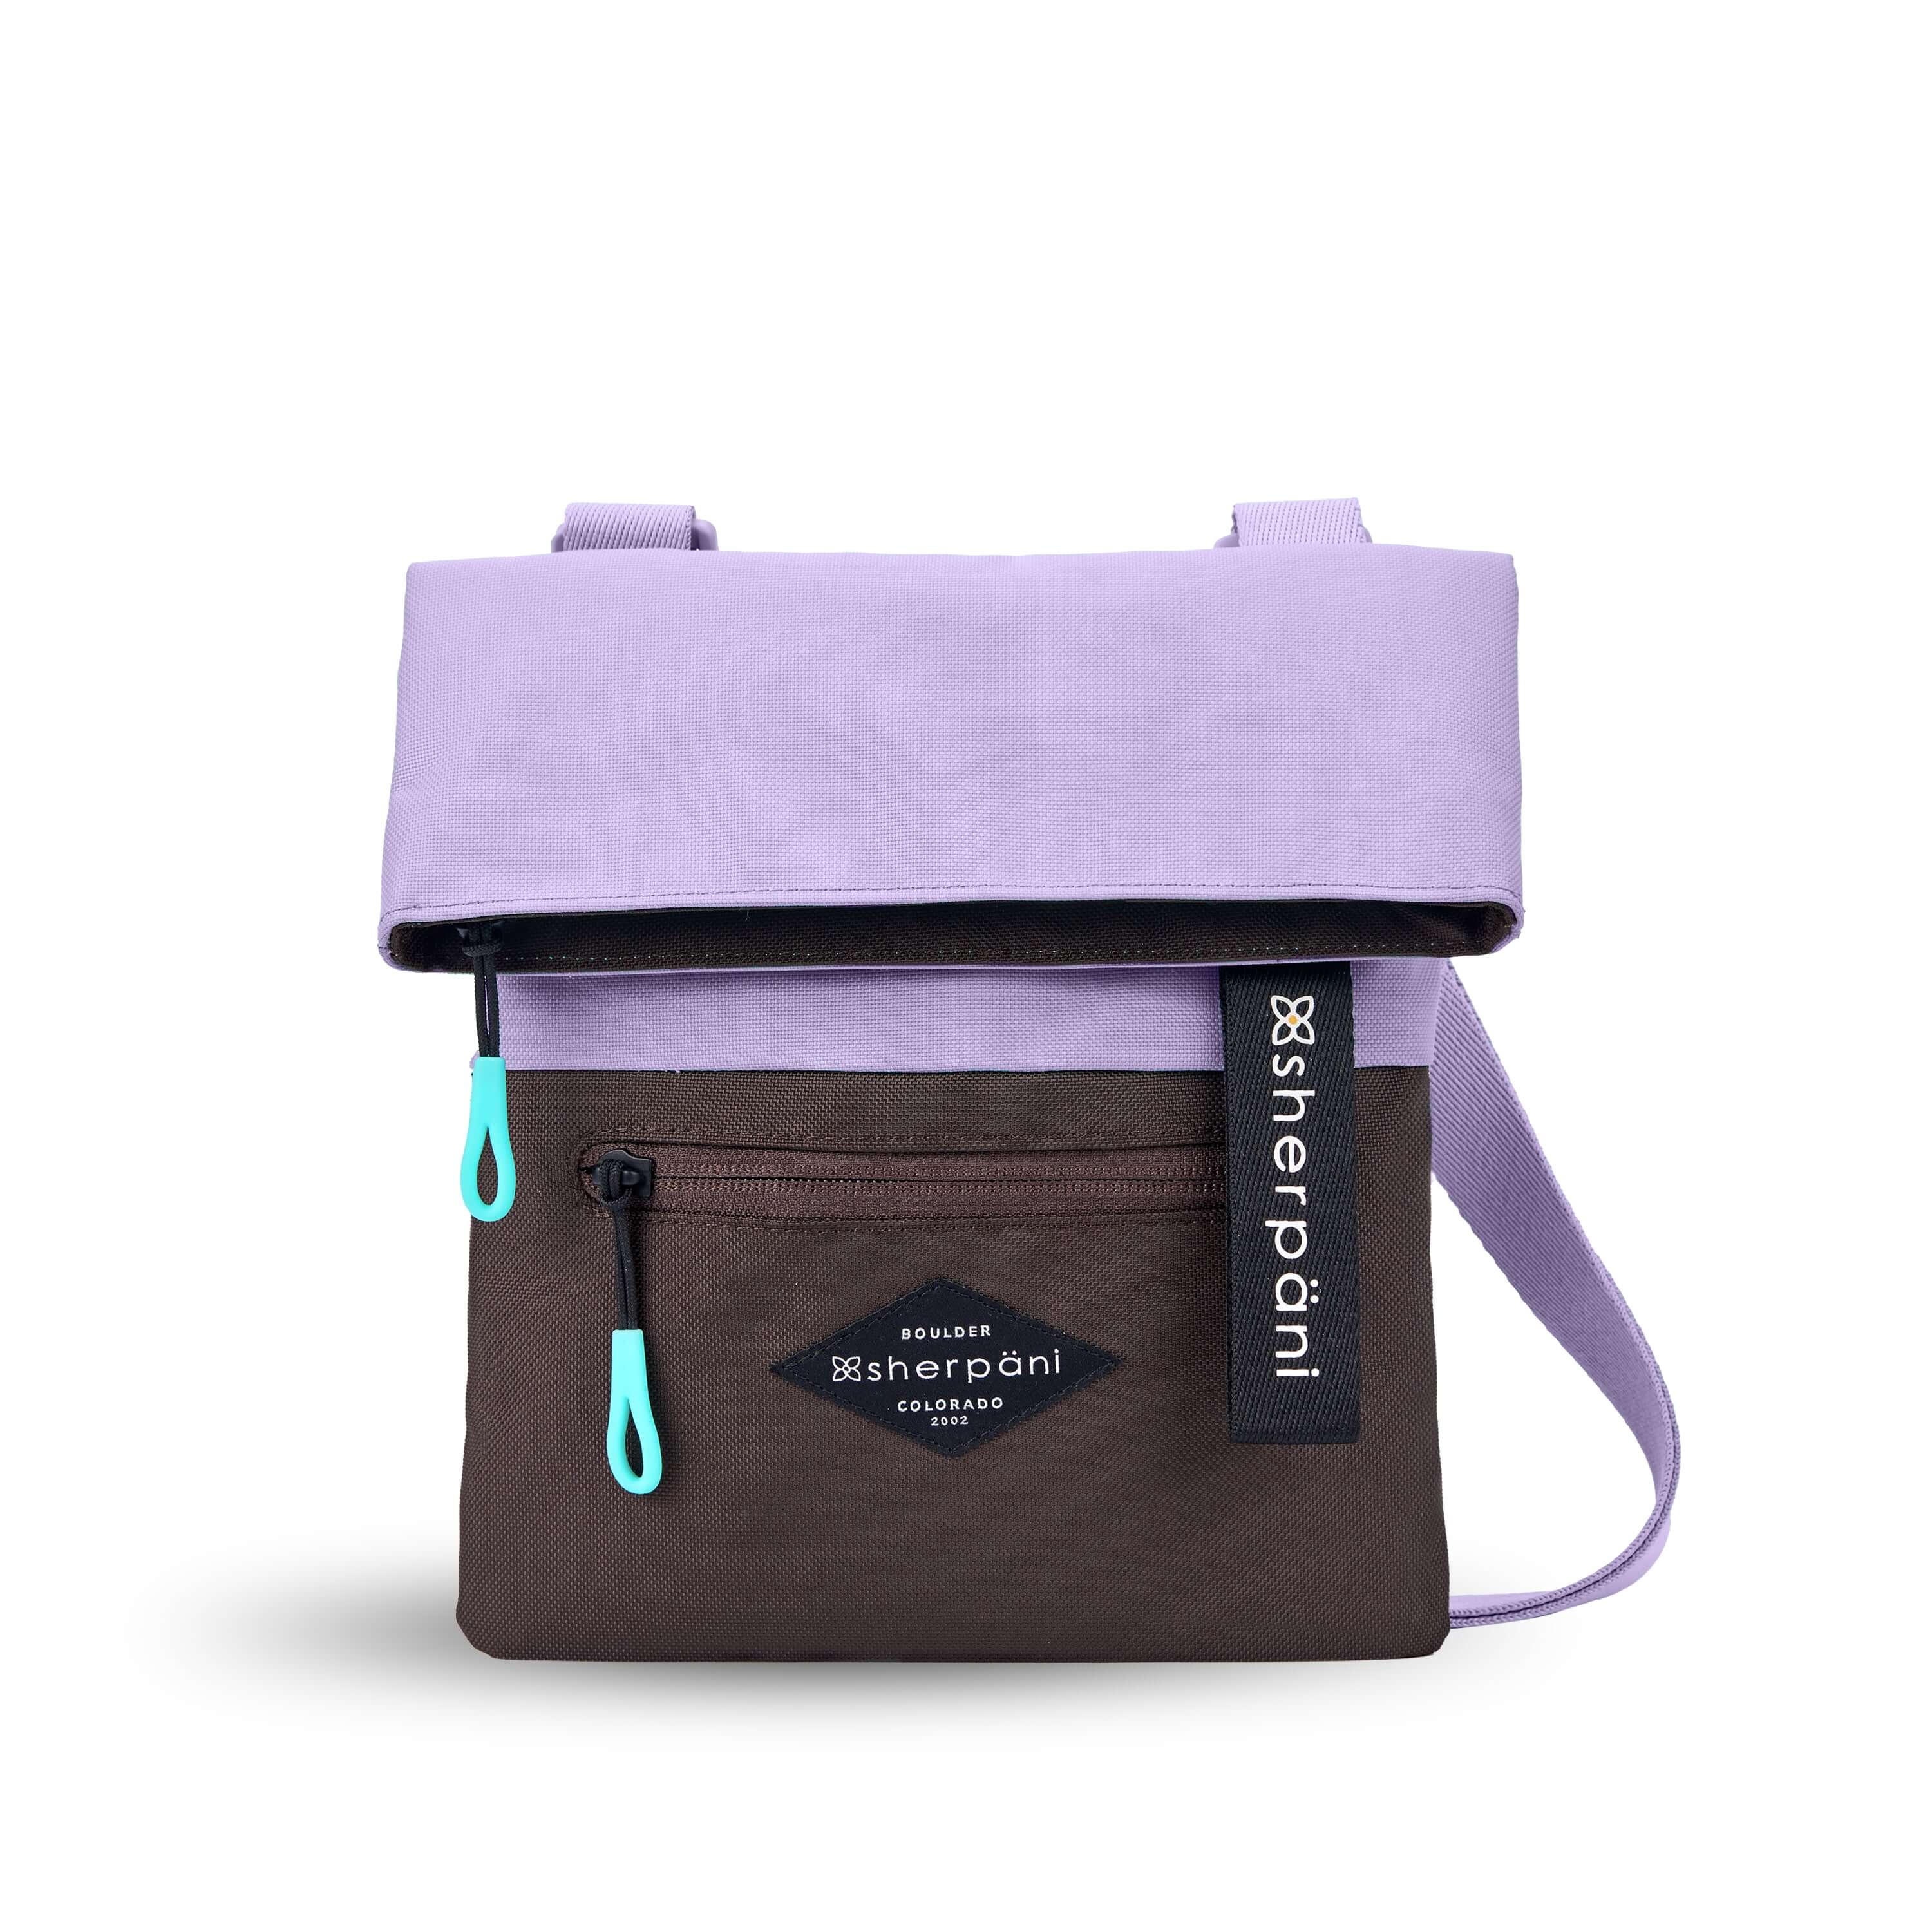 Flat front view of Sherpani crossbody, the Pica in Lavender. The bag is two toned: the top half is lavender and the bottom half is brown. There is an external zipper pocket on the front panel. Easy-pull zippers are accented in aqua. The top of the bag folds over creating a signature look. A branded Sherpani keychain is clipped to the upper right corner. The bag has an adjustable crossbody strap.